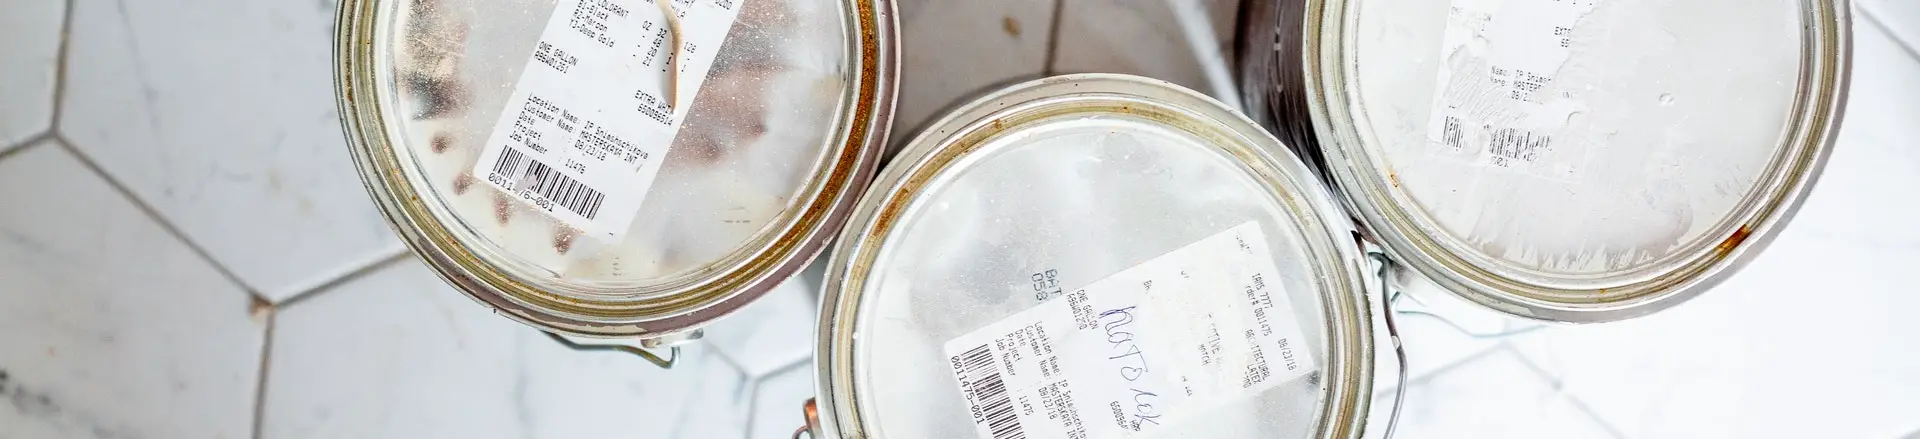 does paint thinner kill bedbugs?